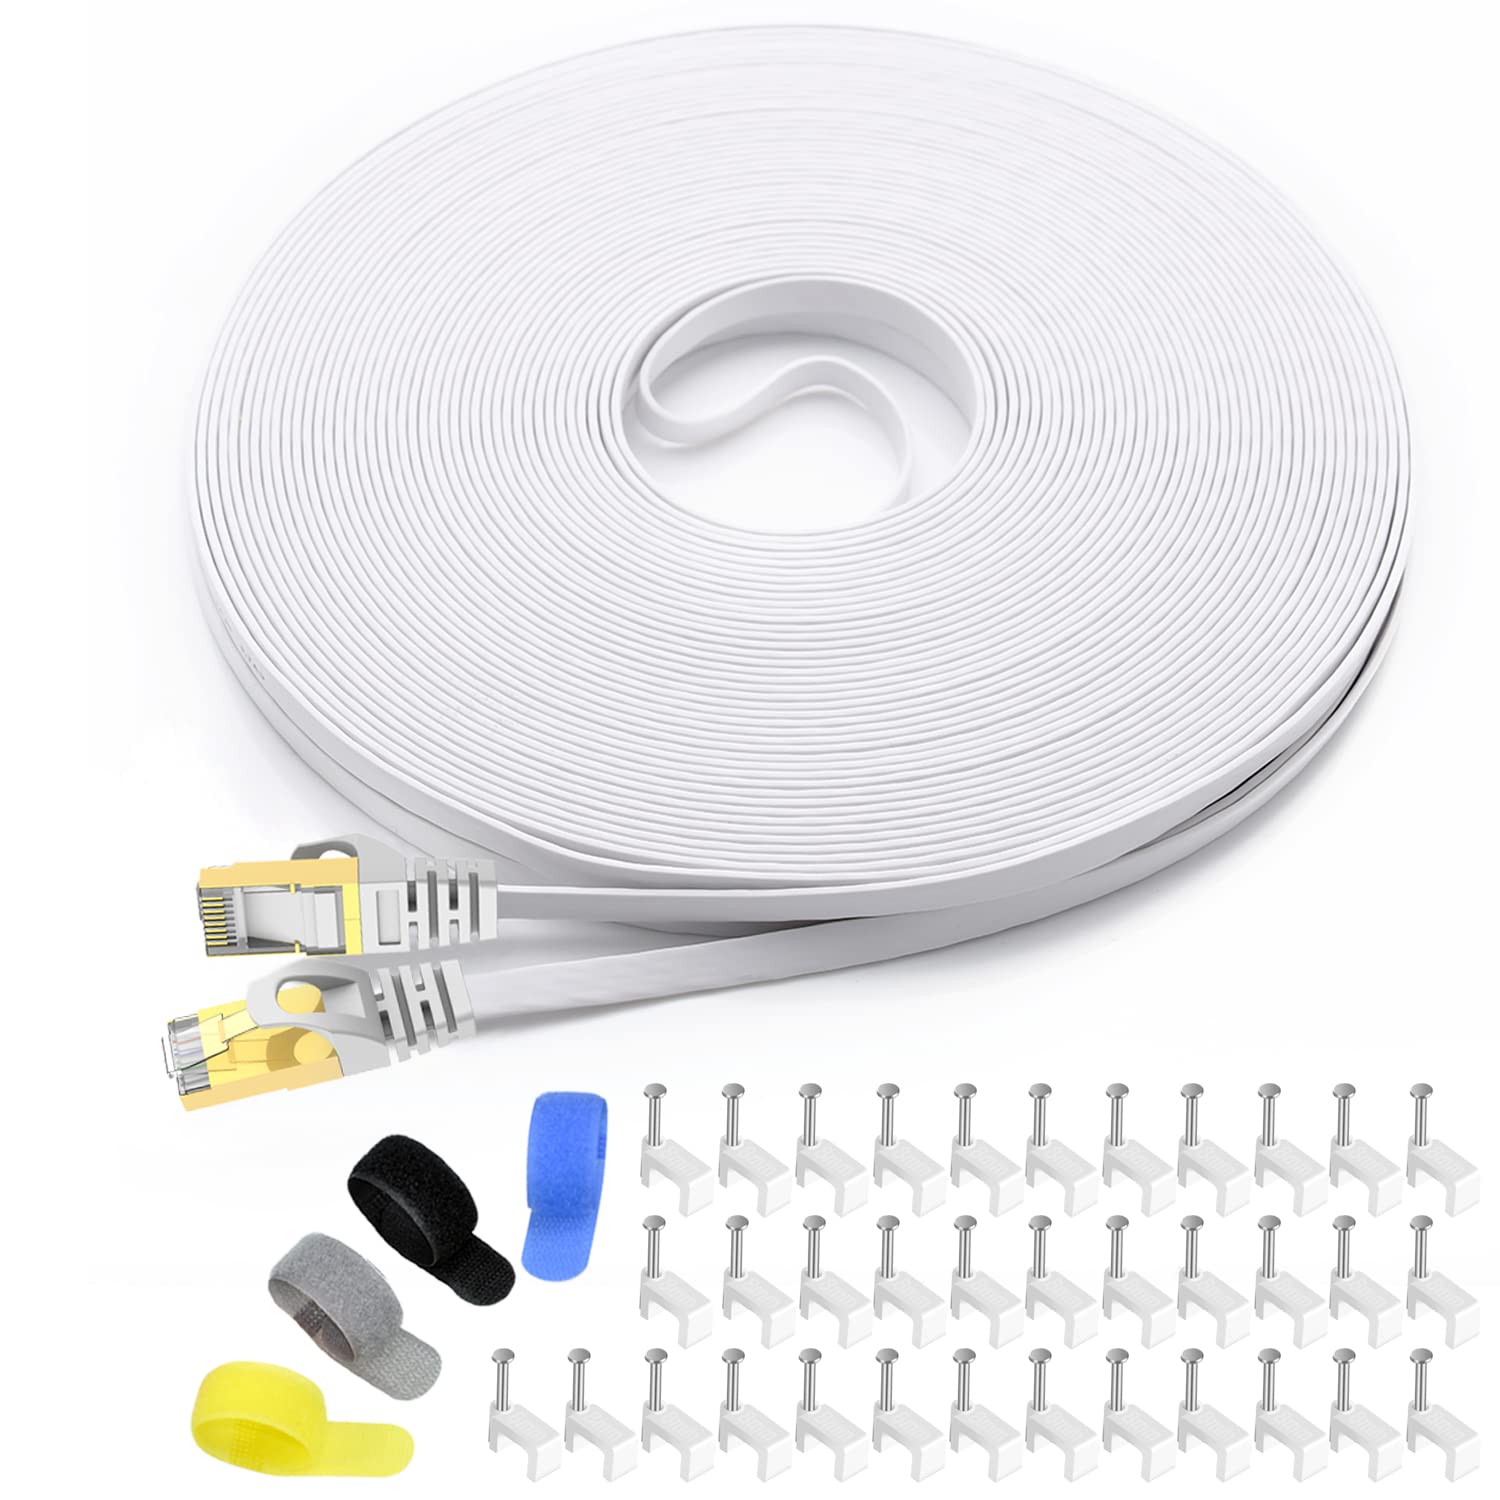 Book Cover Cat 7 Shielded Ethernet Patch Cable 100 ft White (Highest Speed Cable) Cat7 Flat Internet Network Cable with Snagless RJ45 Connector for Modem, Router, LAN, Computer + Free Cable Clips and Straps White Cat7-100ft